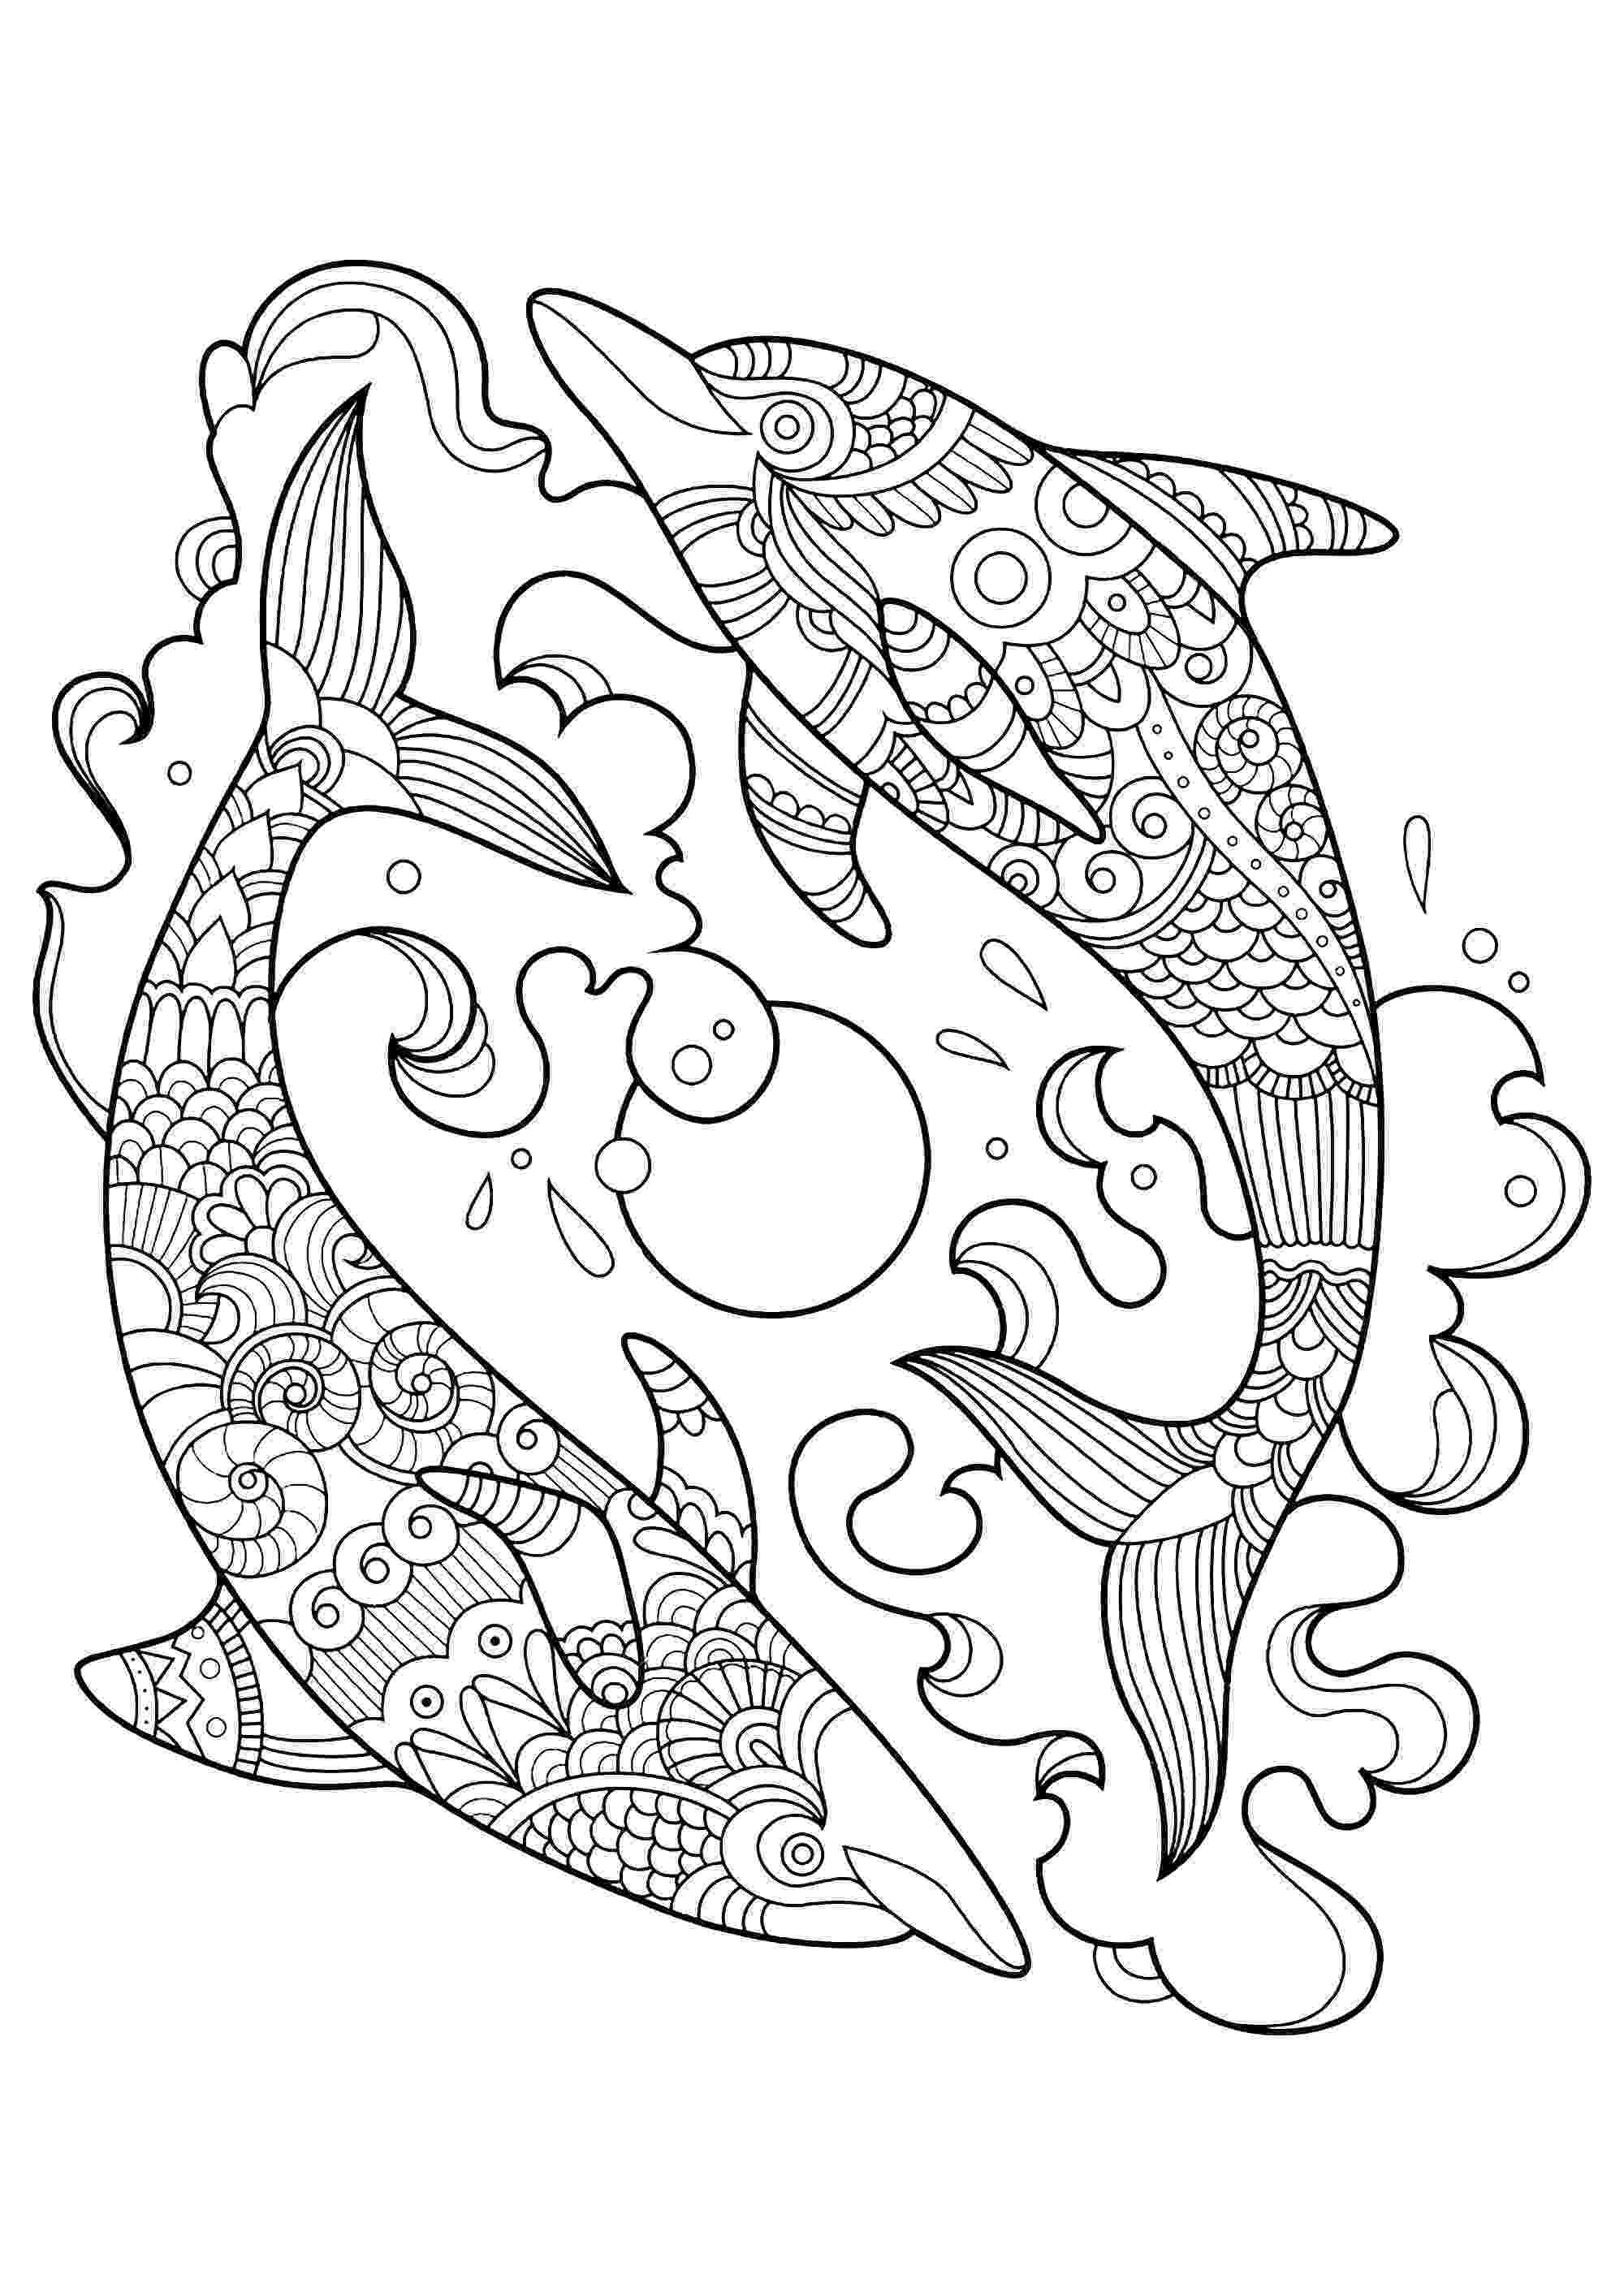 dolphin images to color dolphins to color for children dolphins kids coloring pages to color dolphin images 